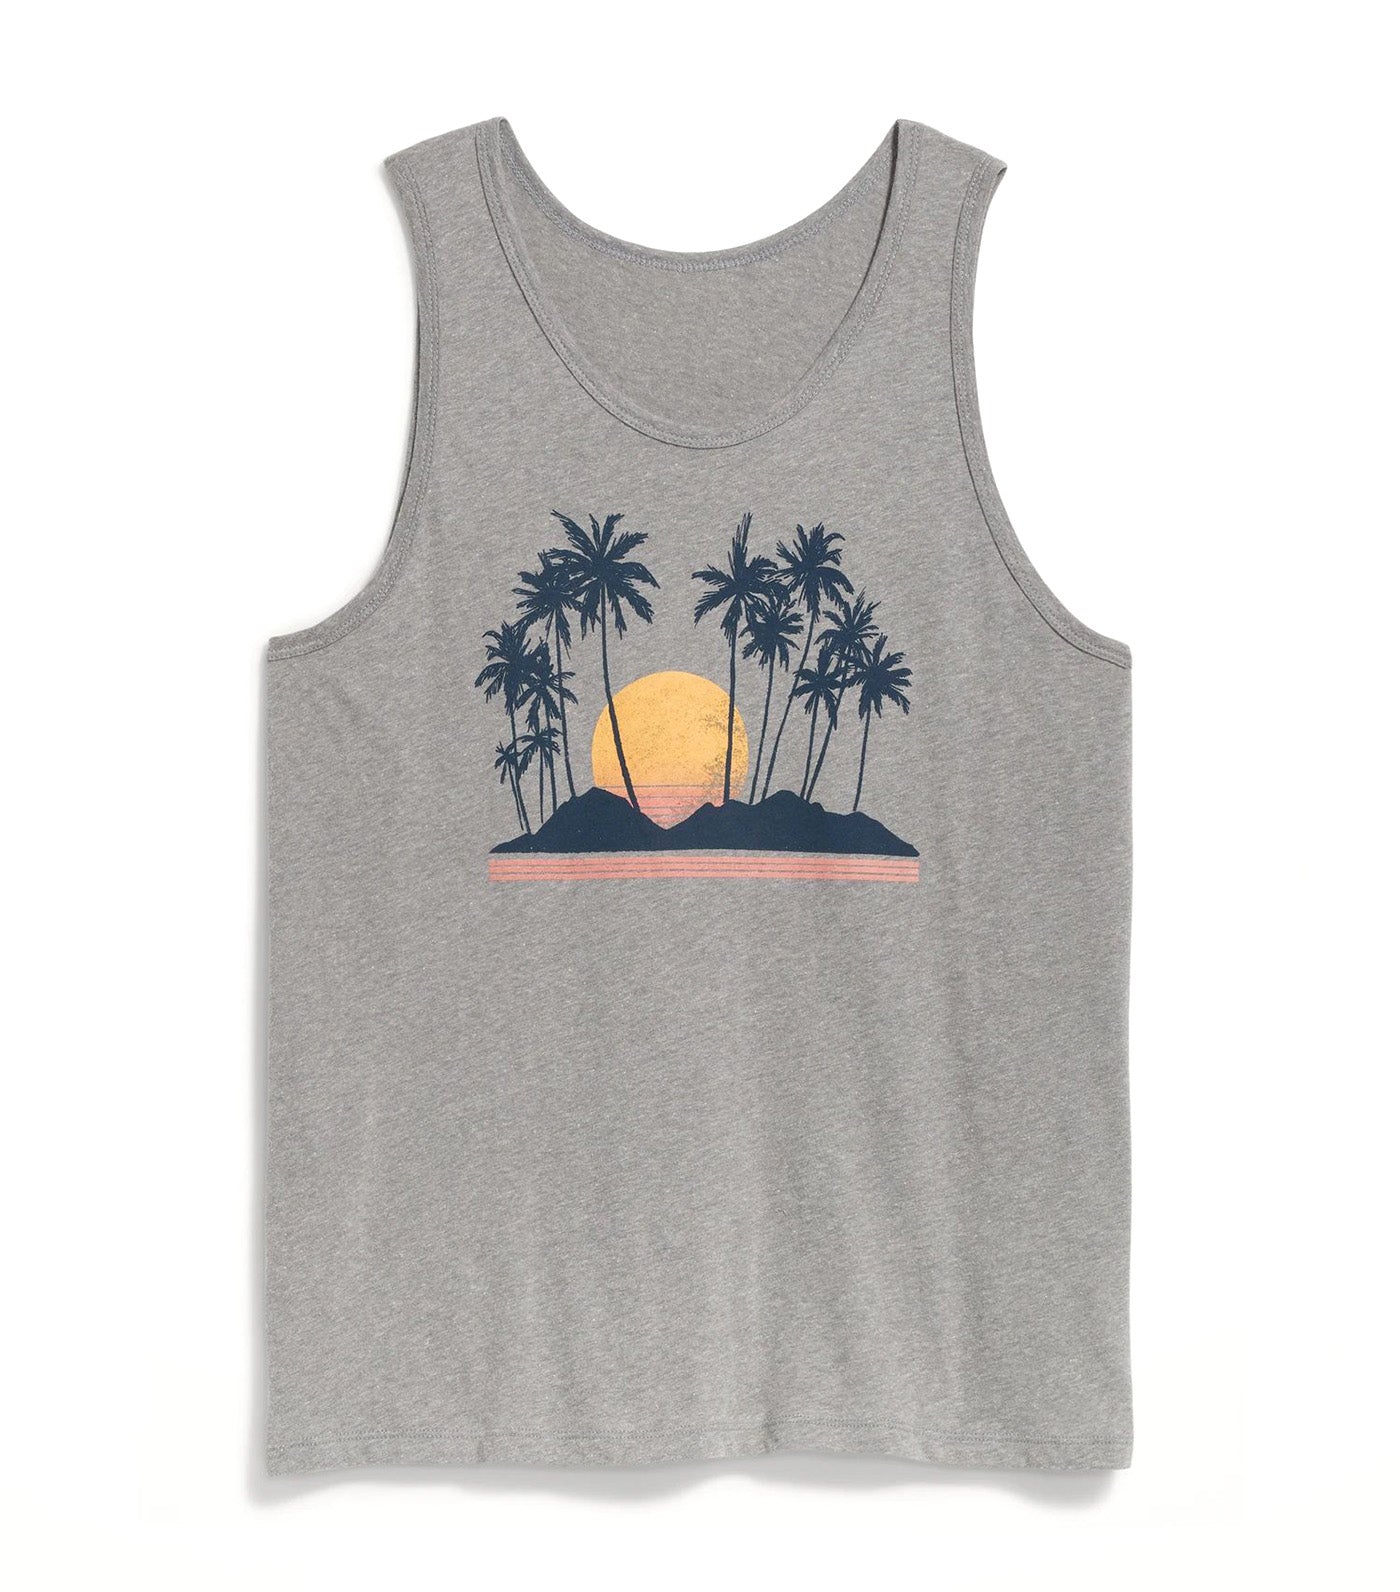 Soft-Washed Graphic Tank Top for Men Gray Vintage Palms